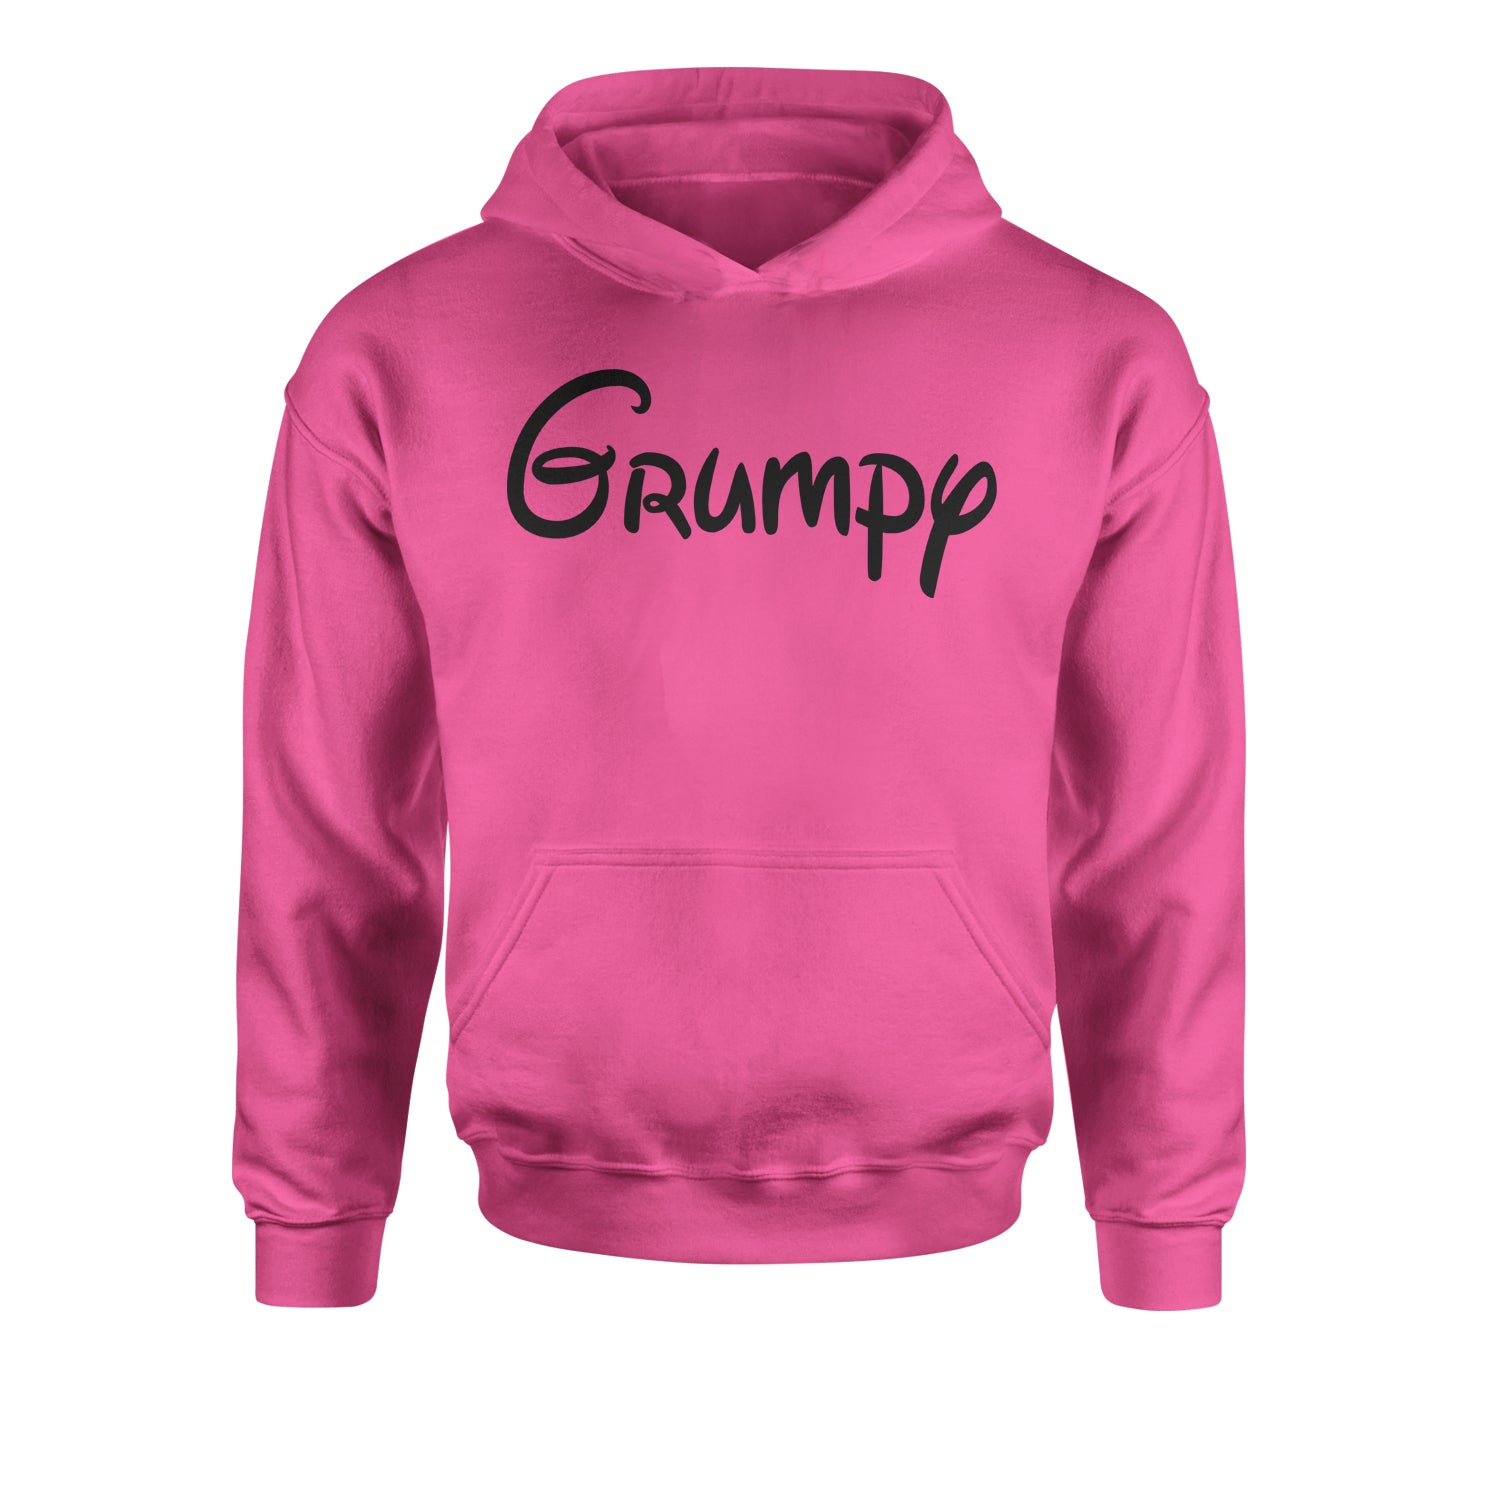 Grumpy - 7 Dwarfs Costume Youth-Sized Hoodie and, costume, dwarfs, group, halloween, matching, seven, snow, the, white by Expression Tees